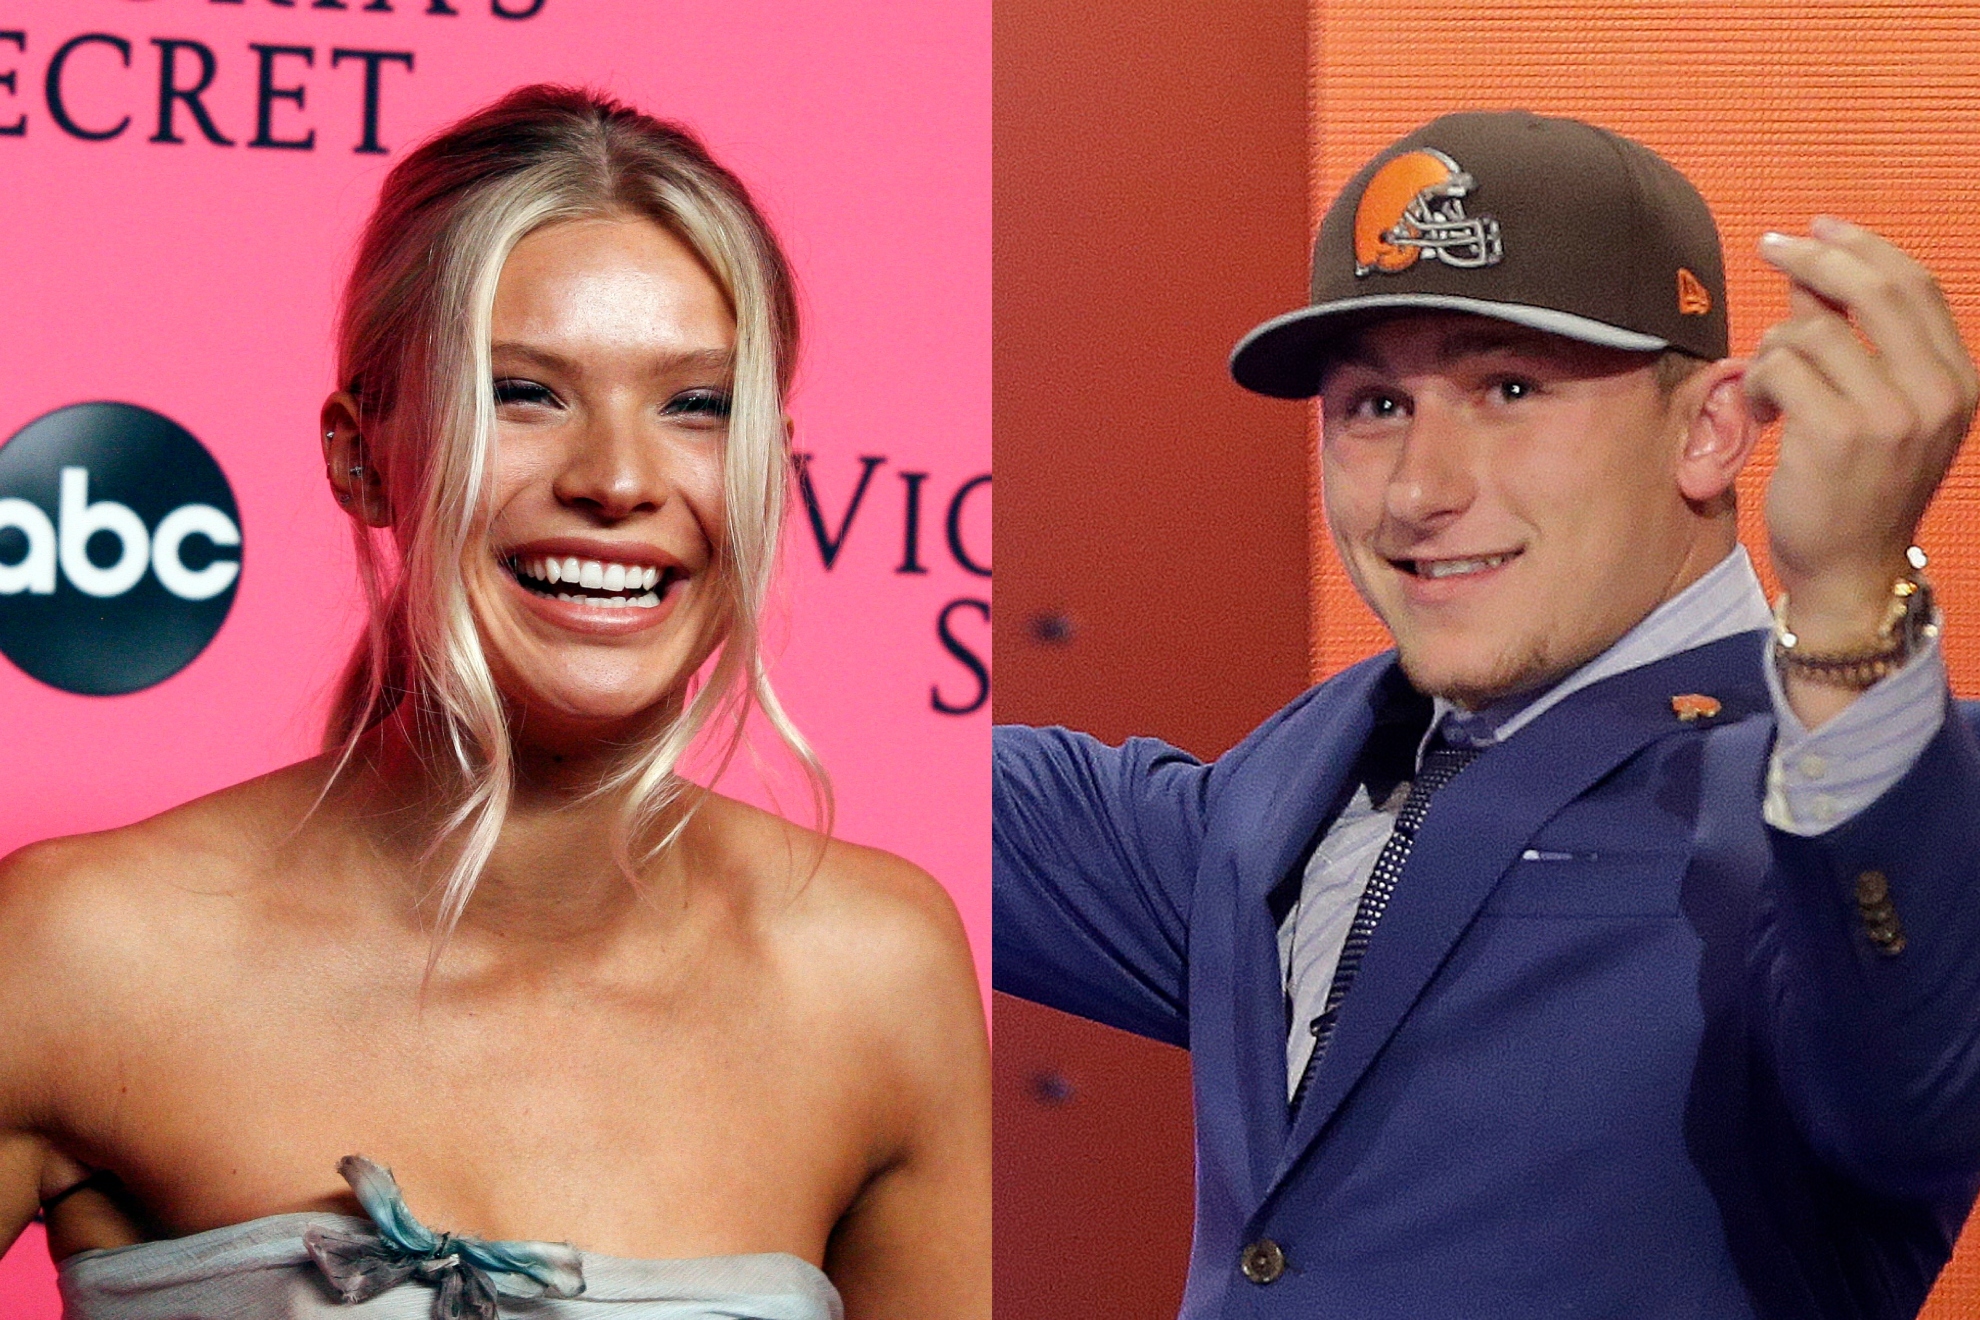 Will Manziel and Canseco finally make it official?